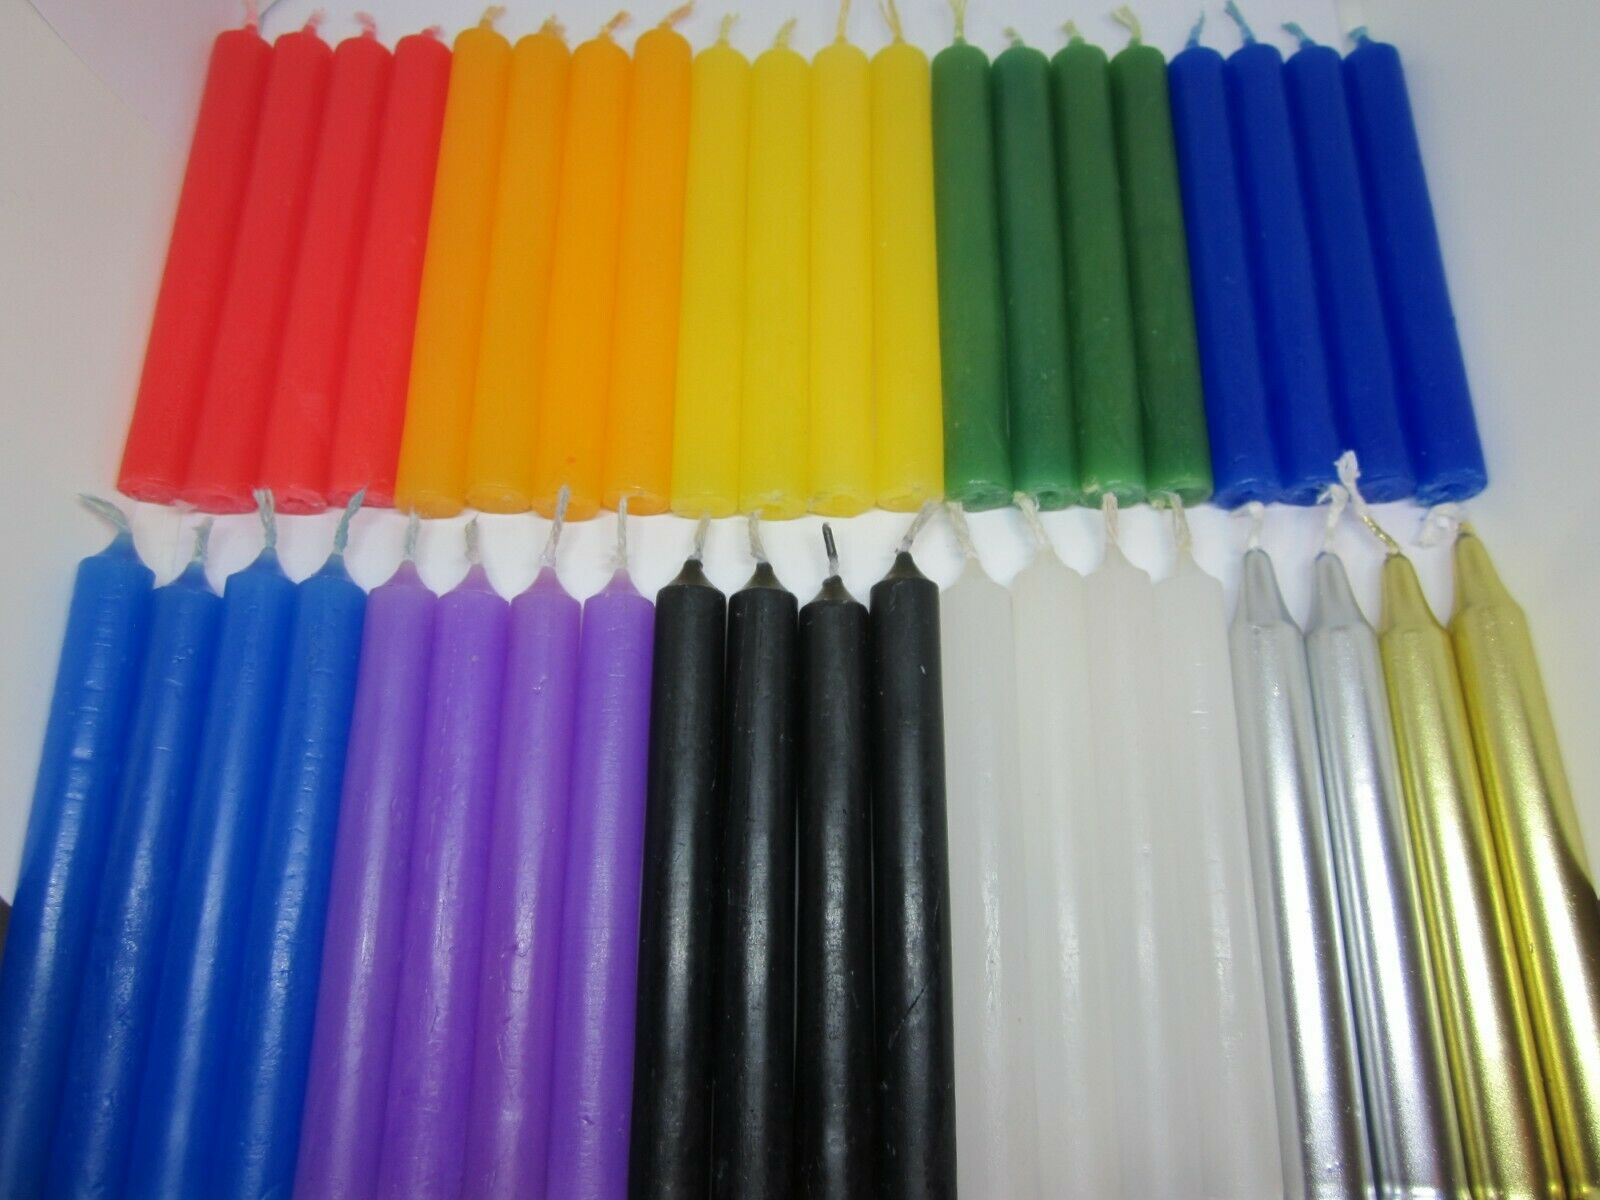 Spell Candles 4" Set Of 4 Available In 12 Colors. Mini Taper Magic Ritual Chime